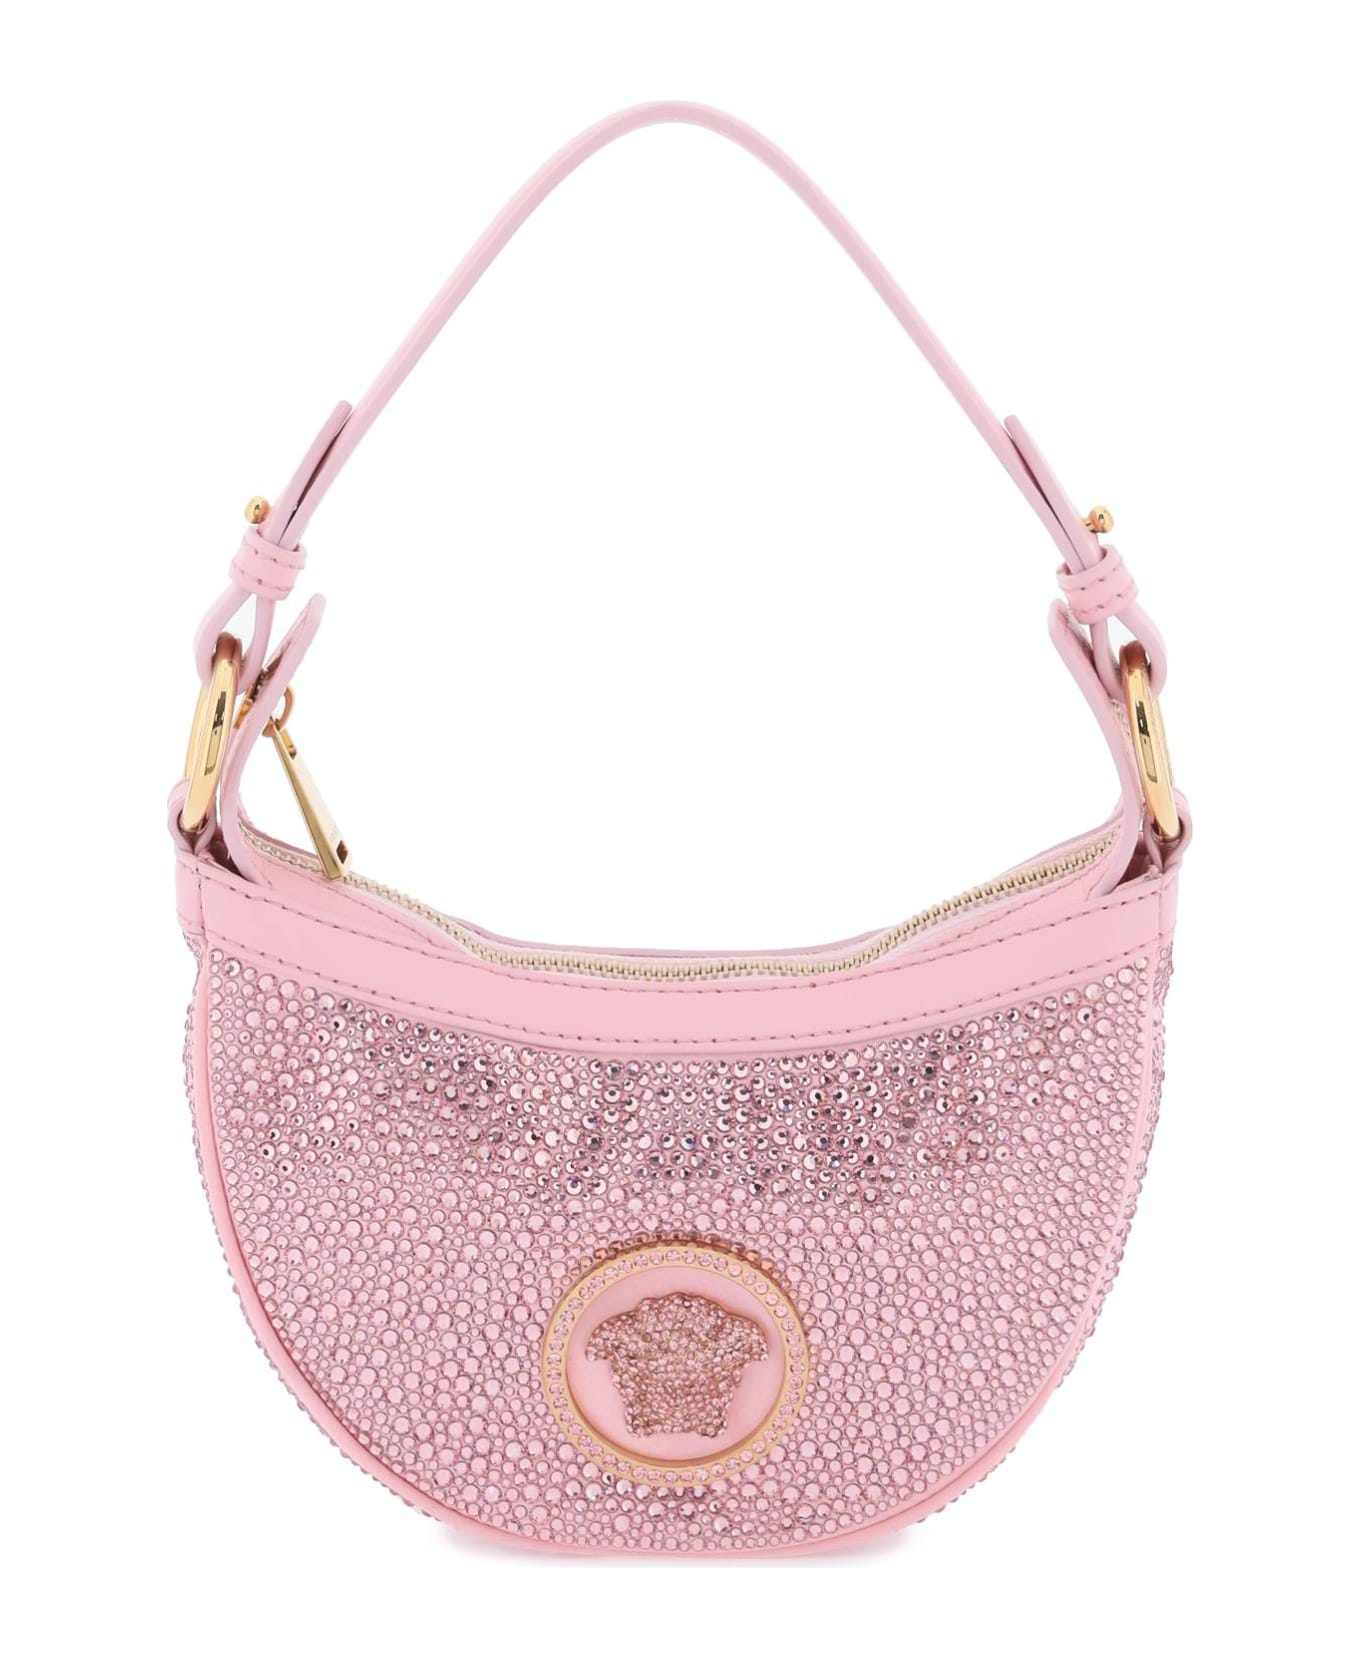 Versace Repeat Mini Hobo Bag With Crystals - PALE PINK VERSACE GOLD (Pink) トートバッグ